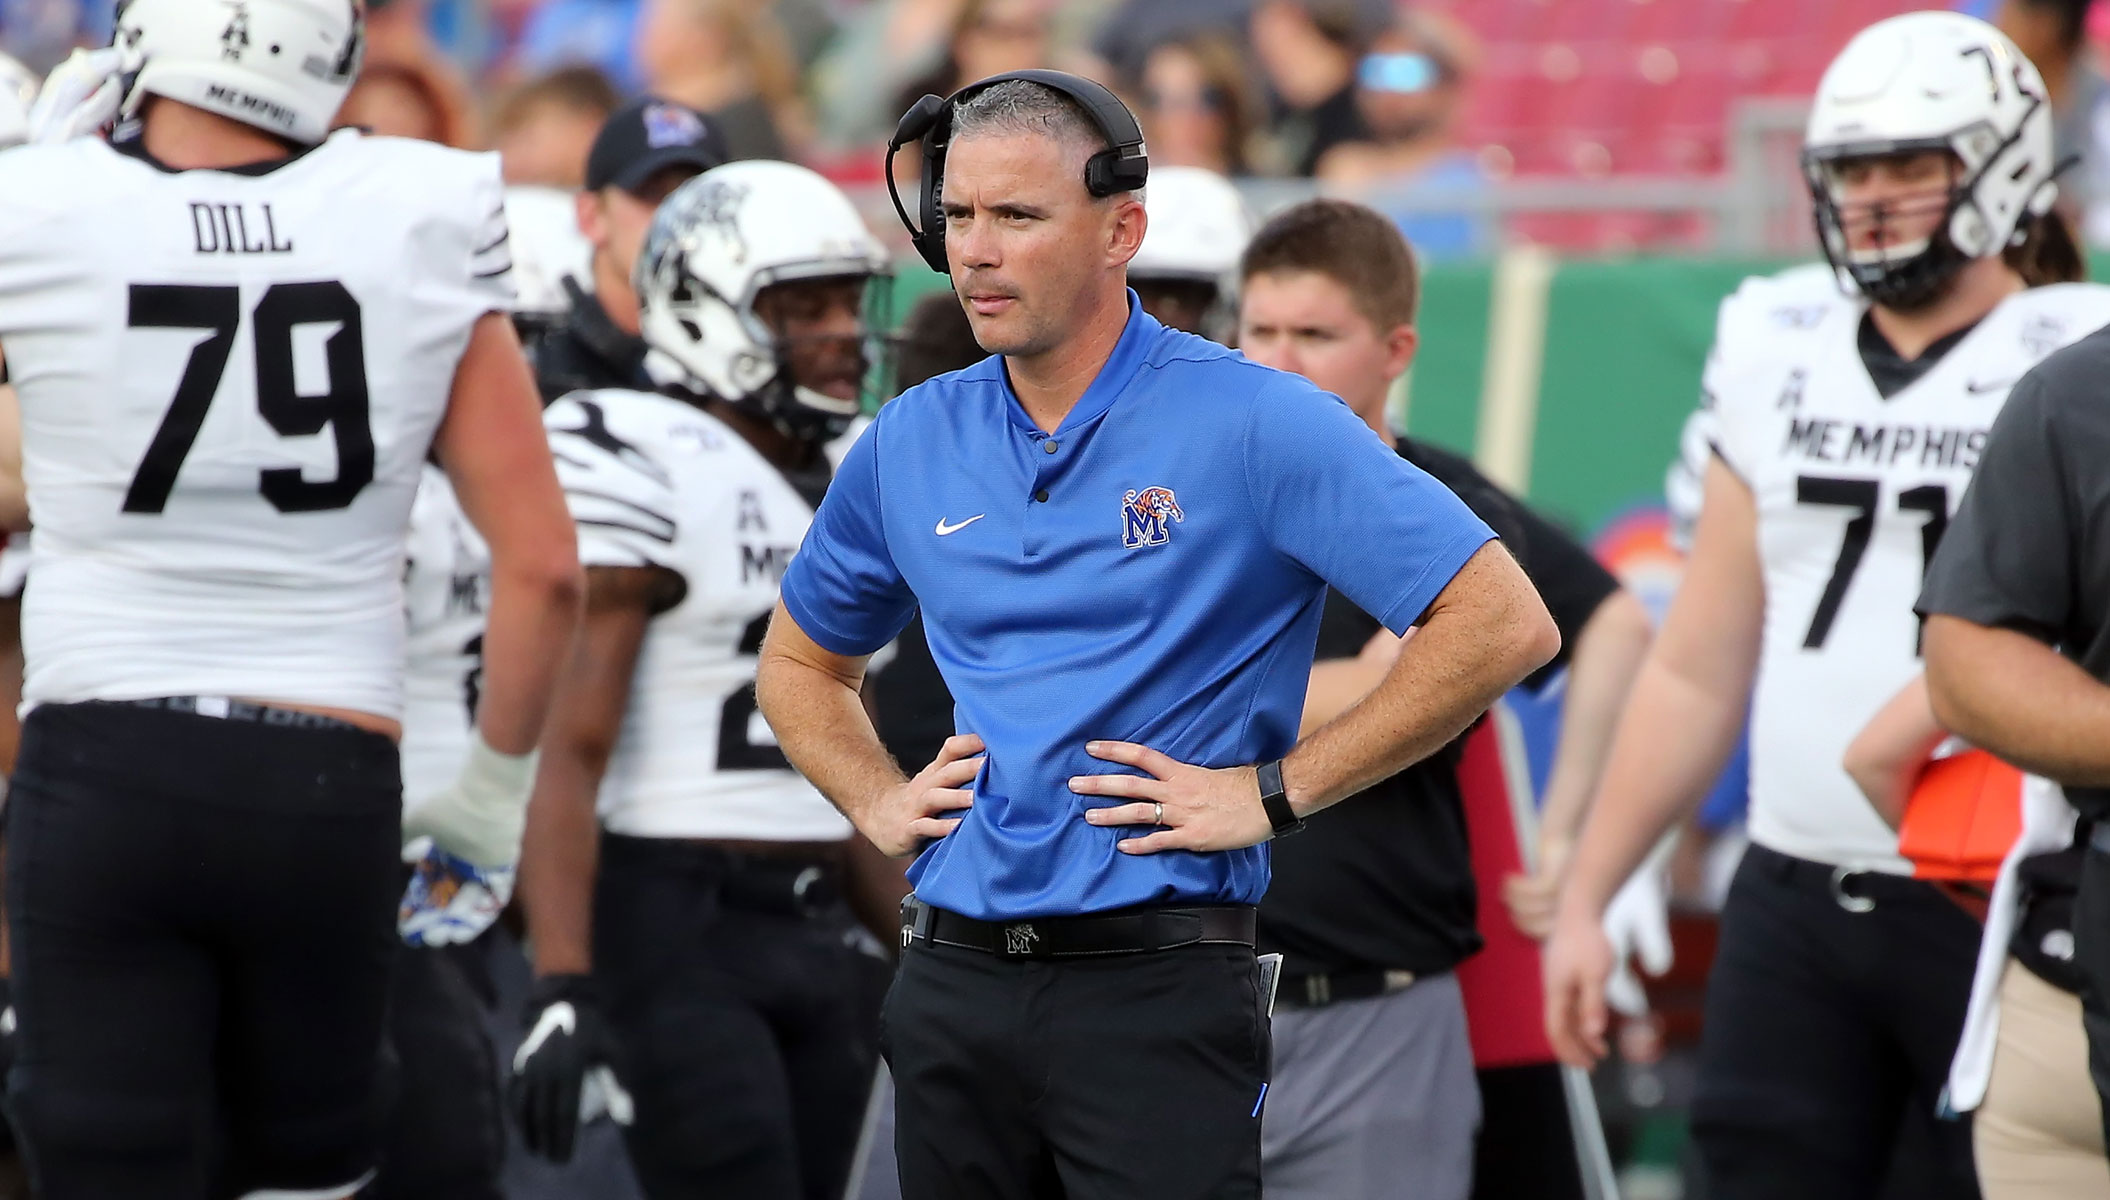 Lang’s World: Who replaces Mike Norvell? Depends which type of coach the Memphis Tigers want